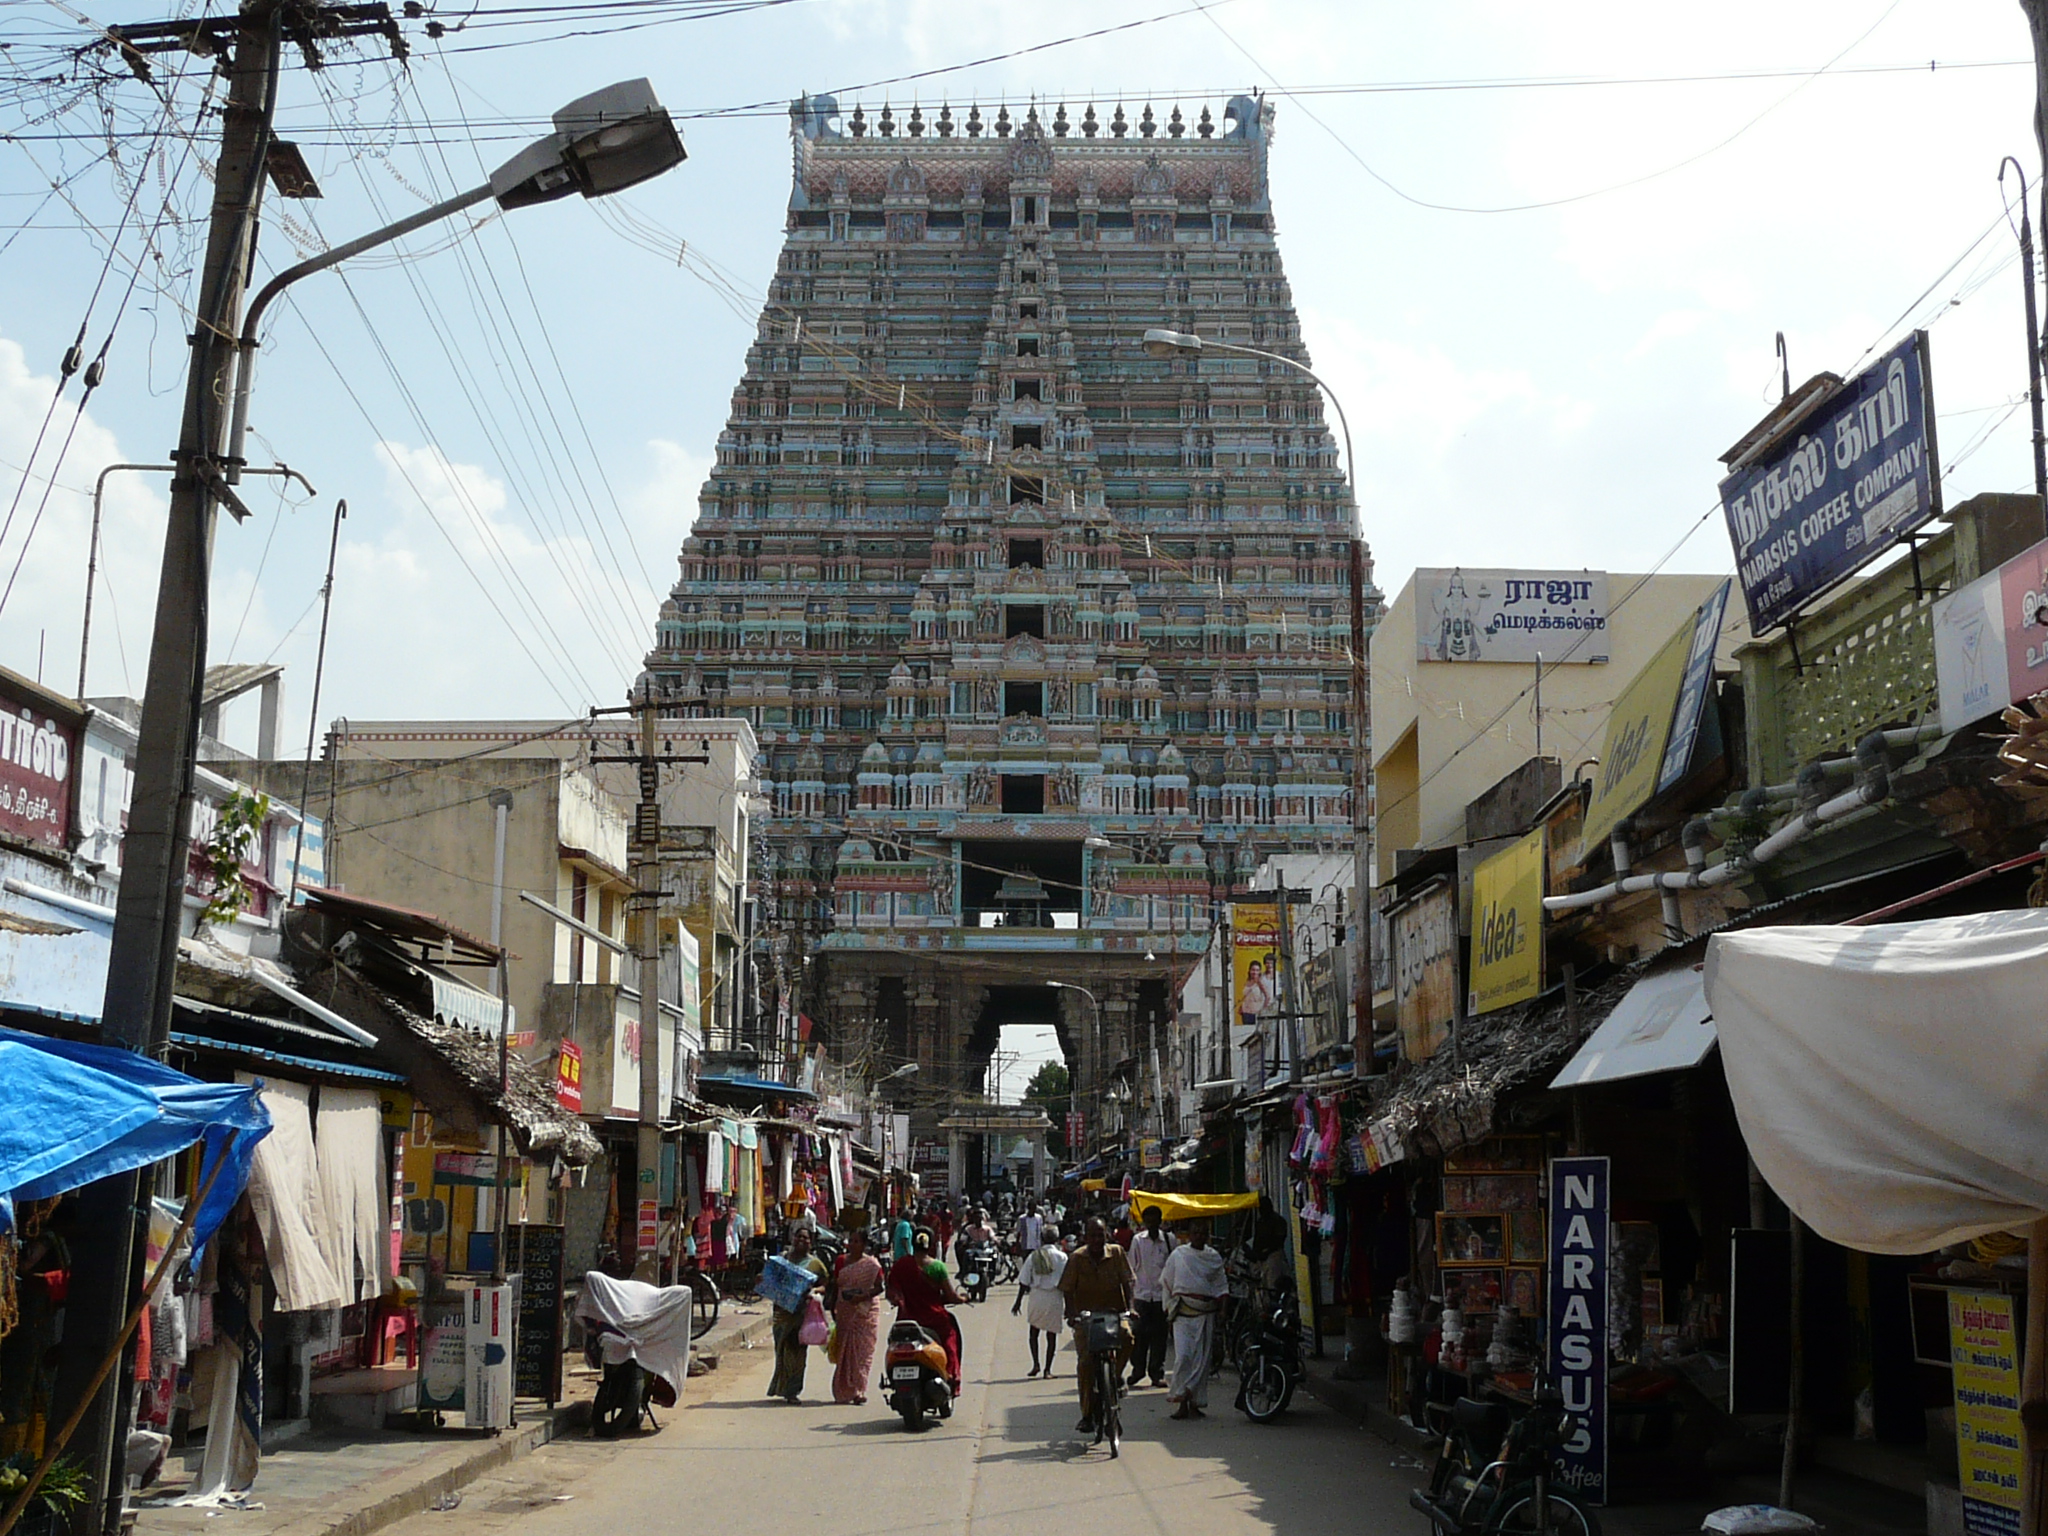 a view of a tall tower structure over a market area